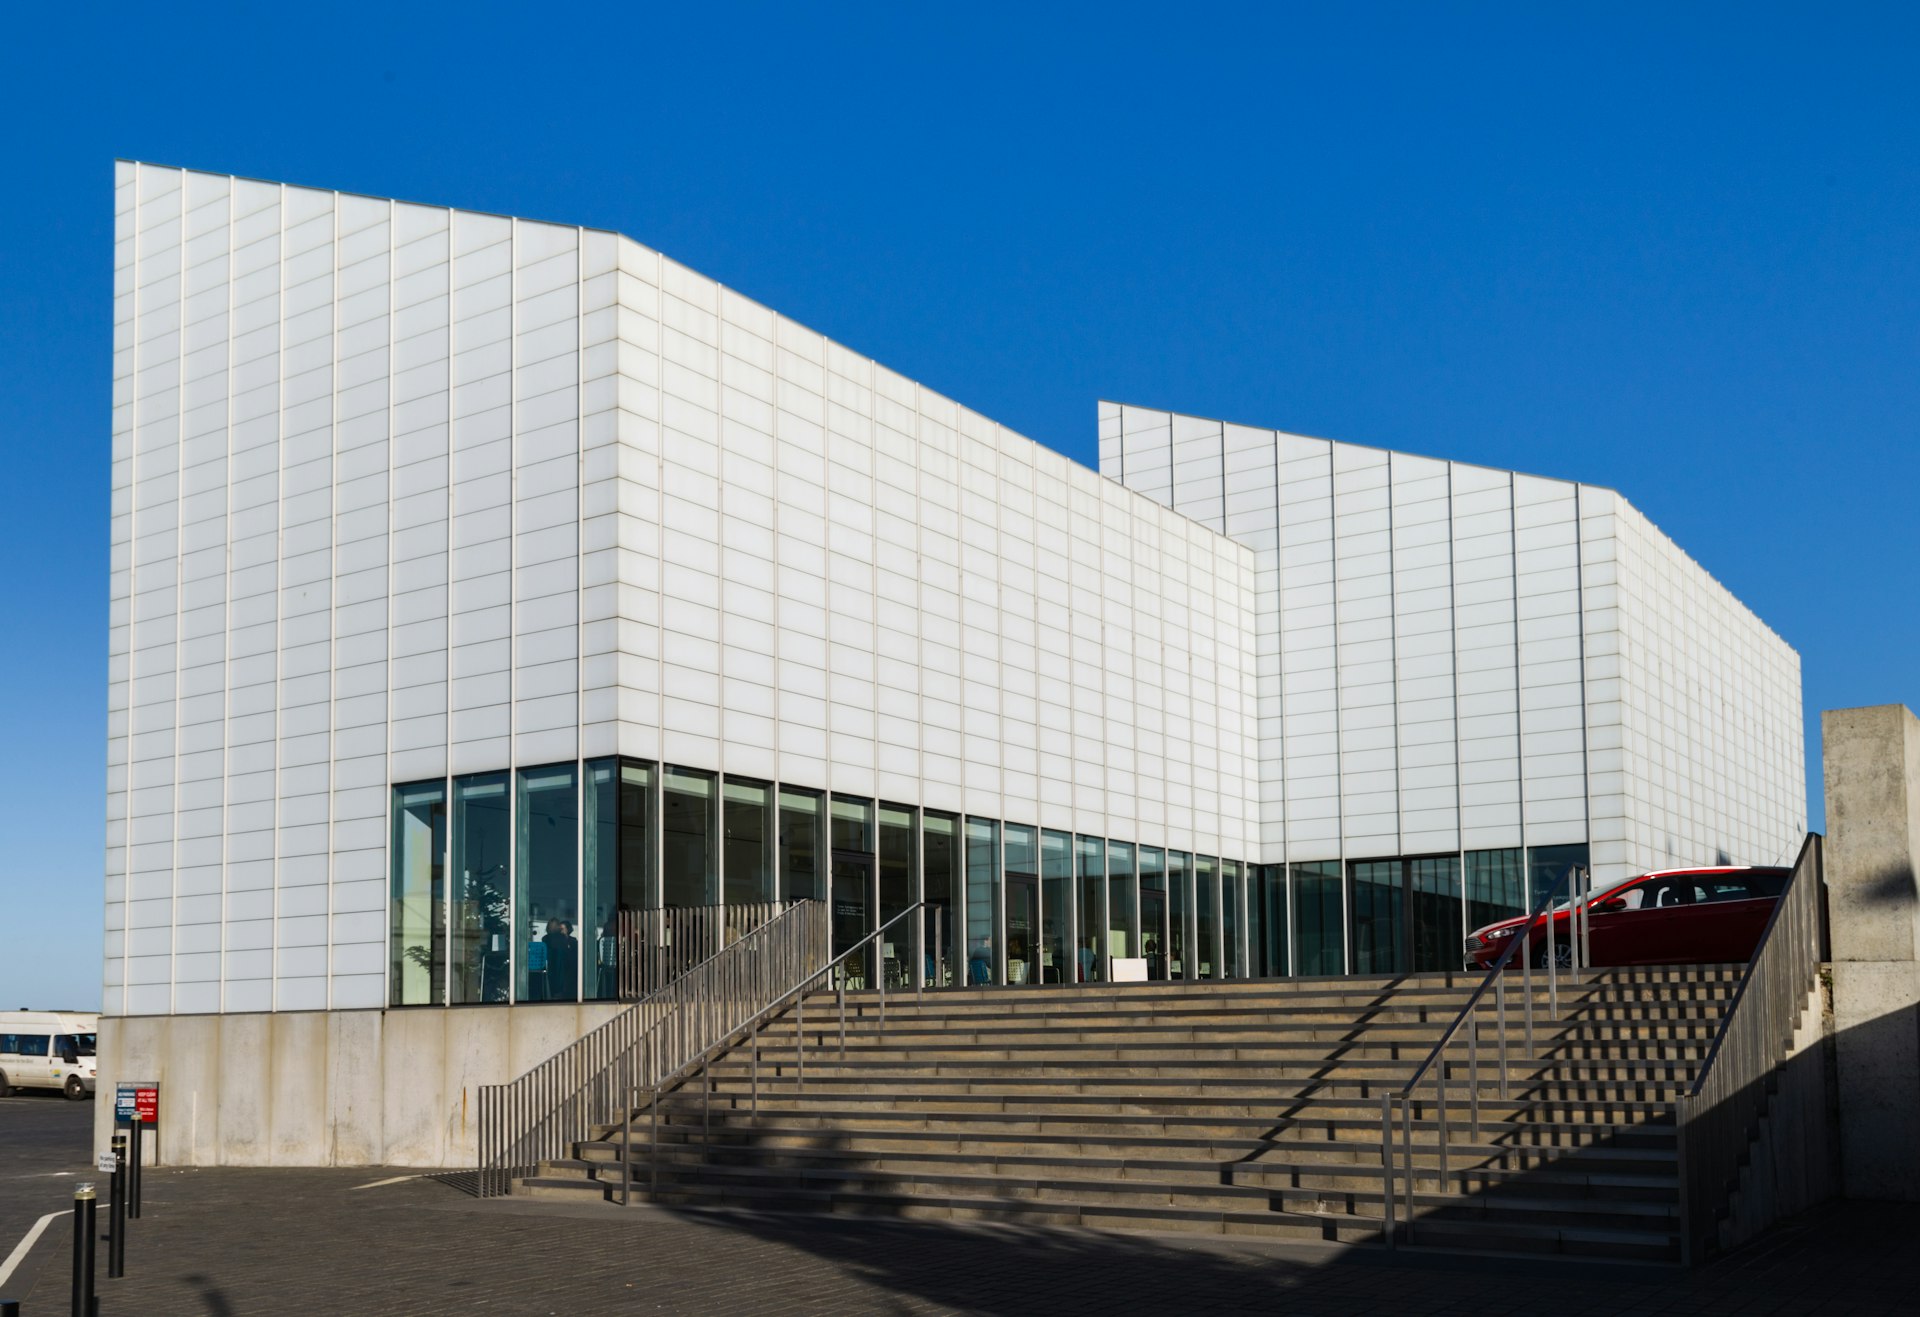 The bright white, angular exterior of the Turner Contemporary art gallery in Margate.